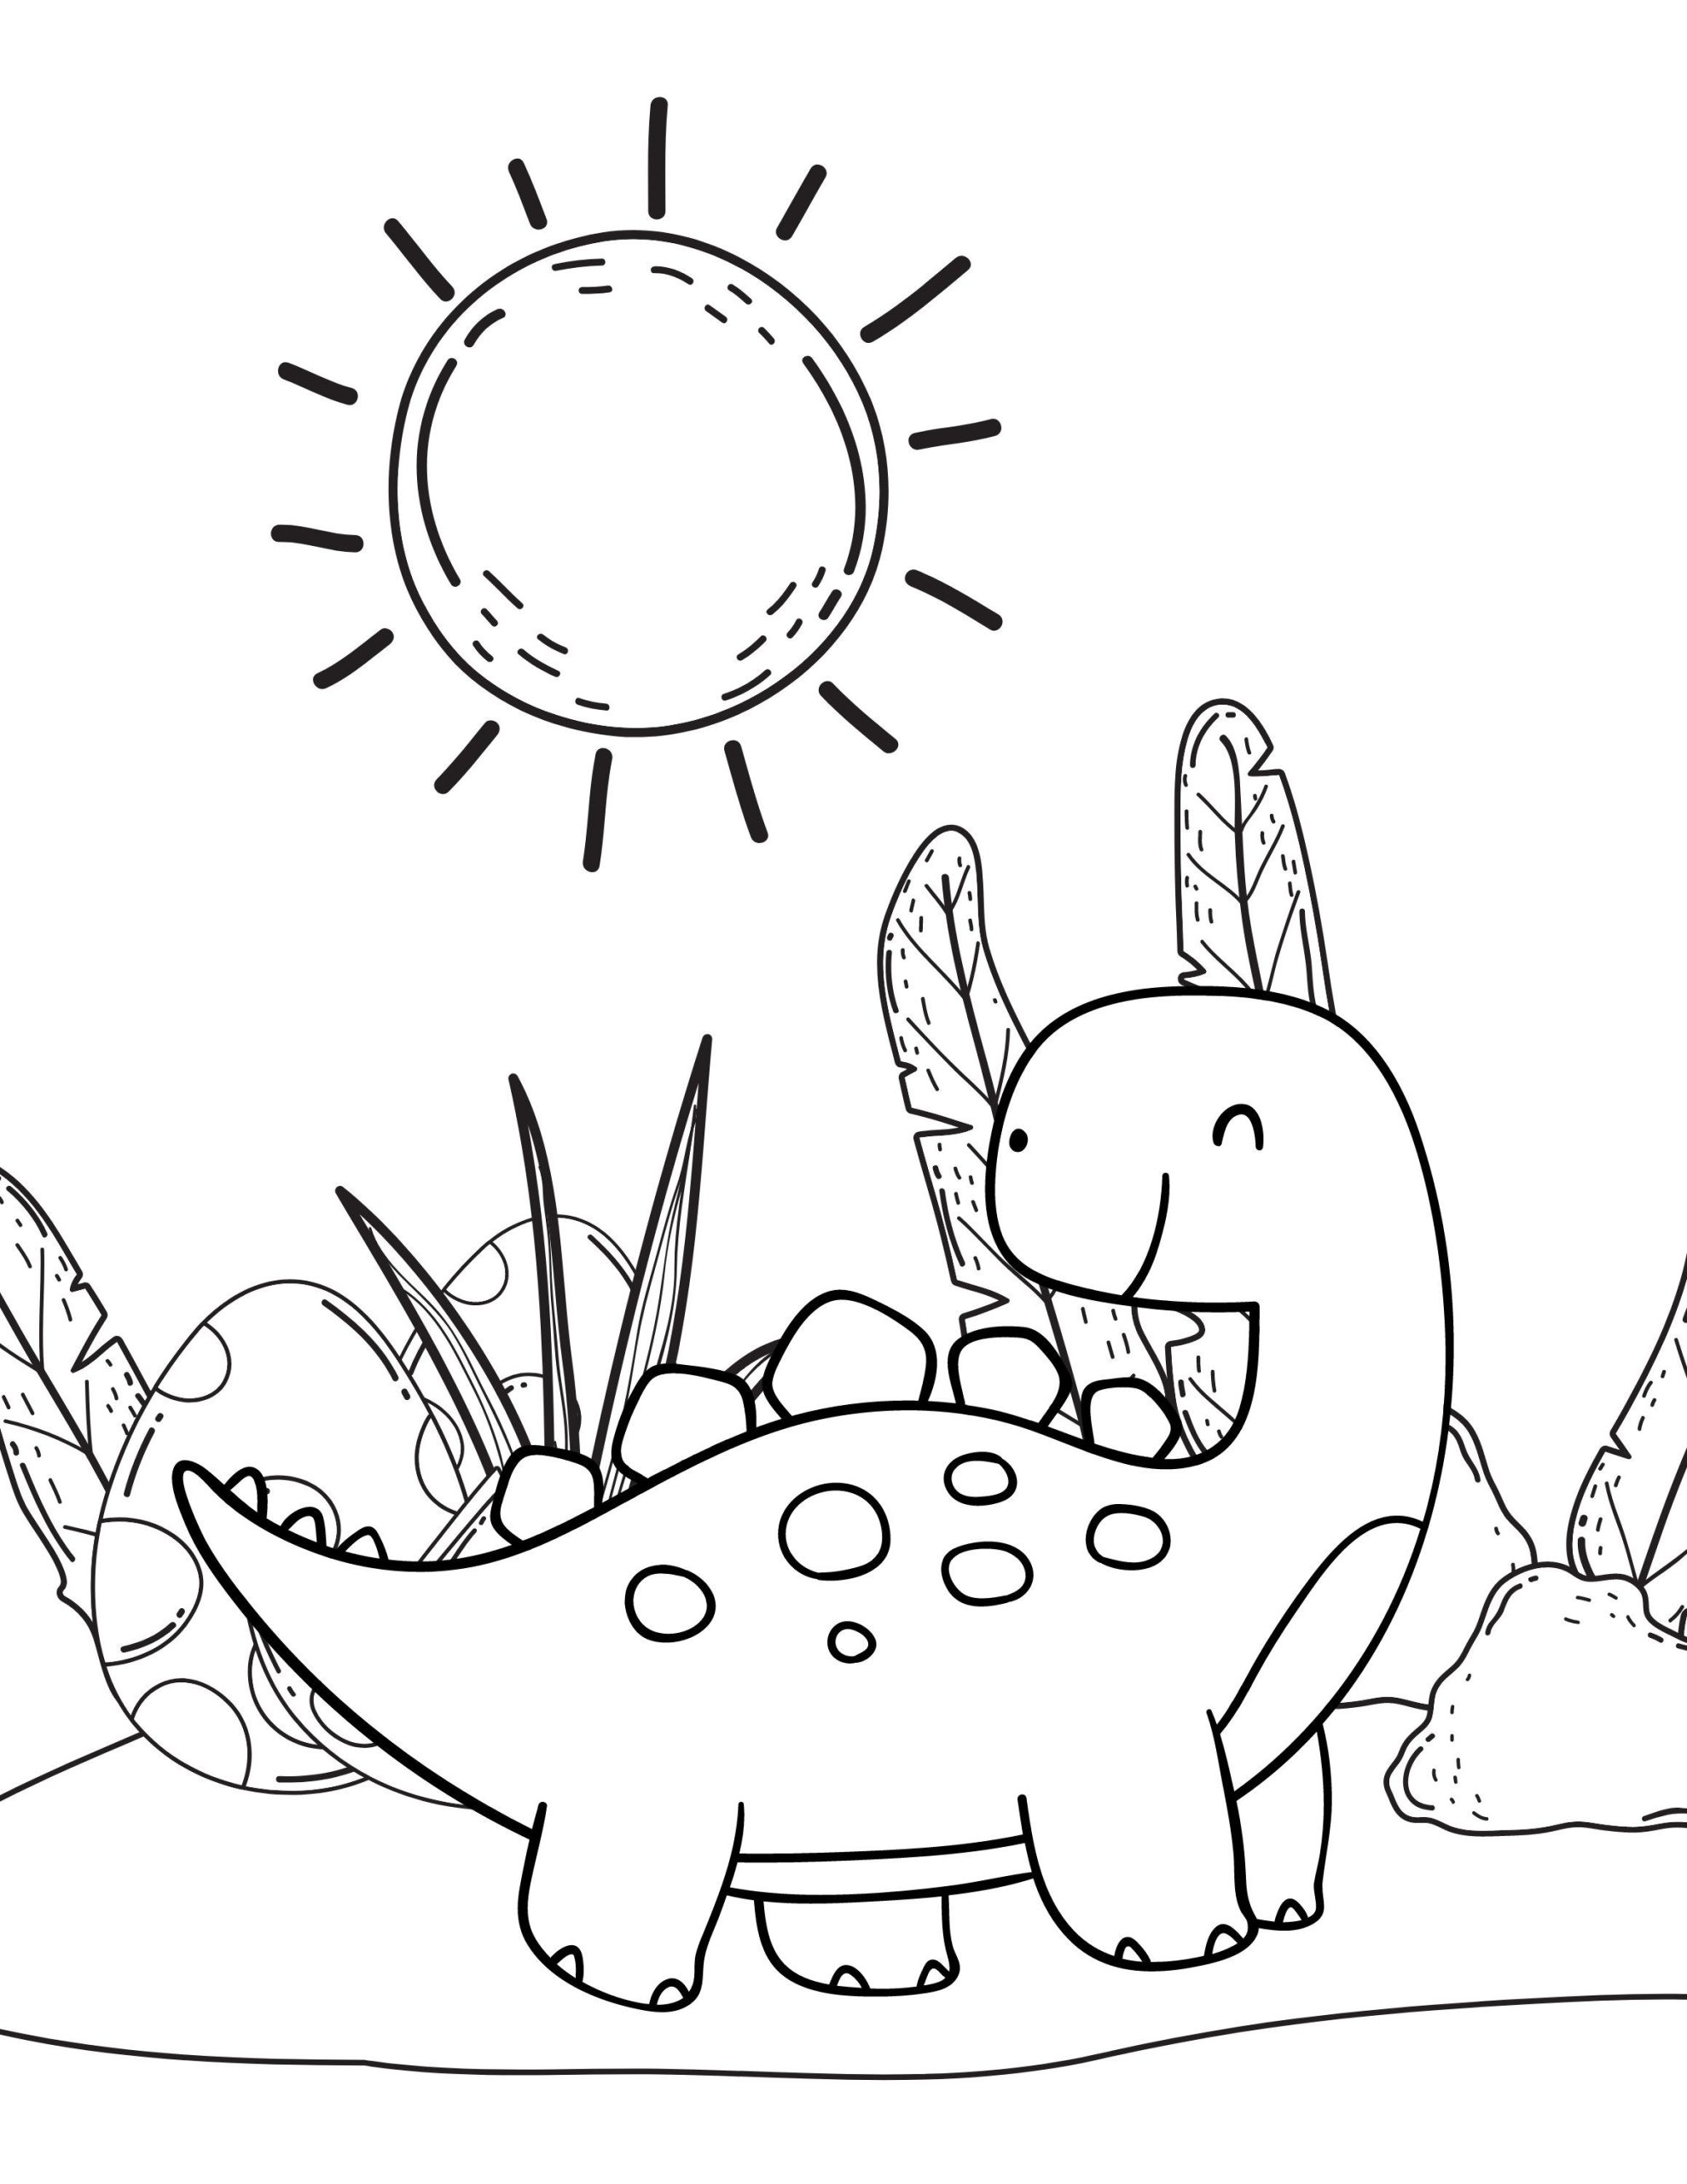 Dinosaur Coloring Pages, Dinosaur Coloring Book, Printable Coloring Book, Kids Coloring Pages